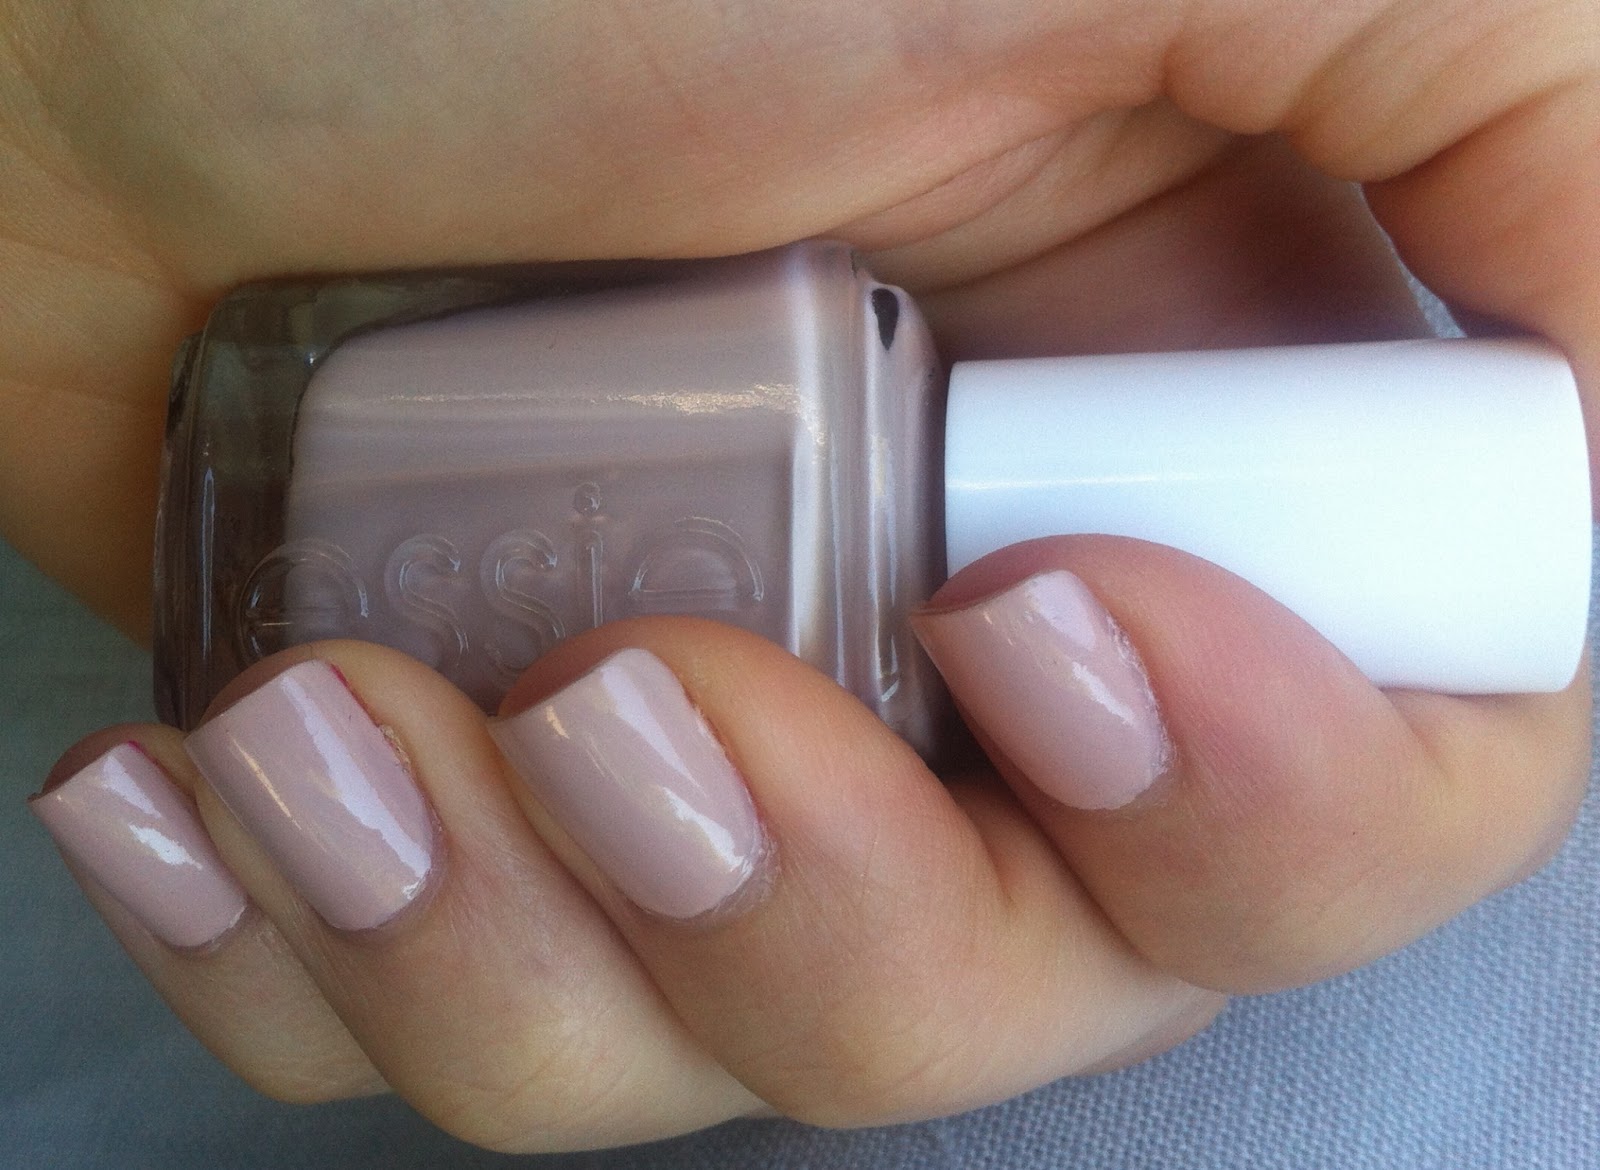 Essie Nail Polish in "Topless and Barefoot" - wide 3